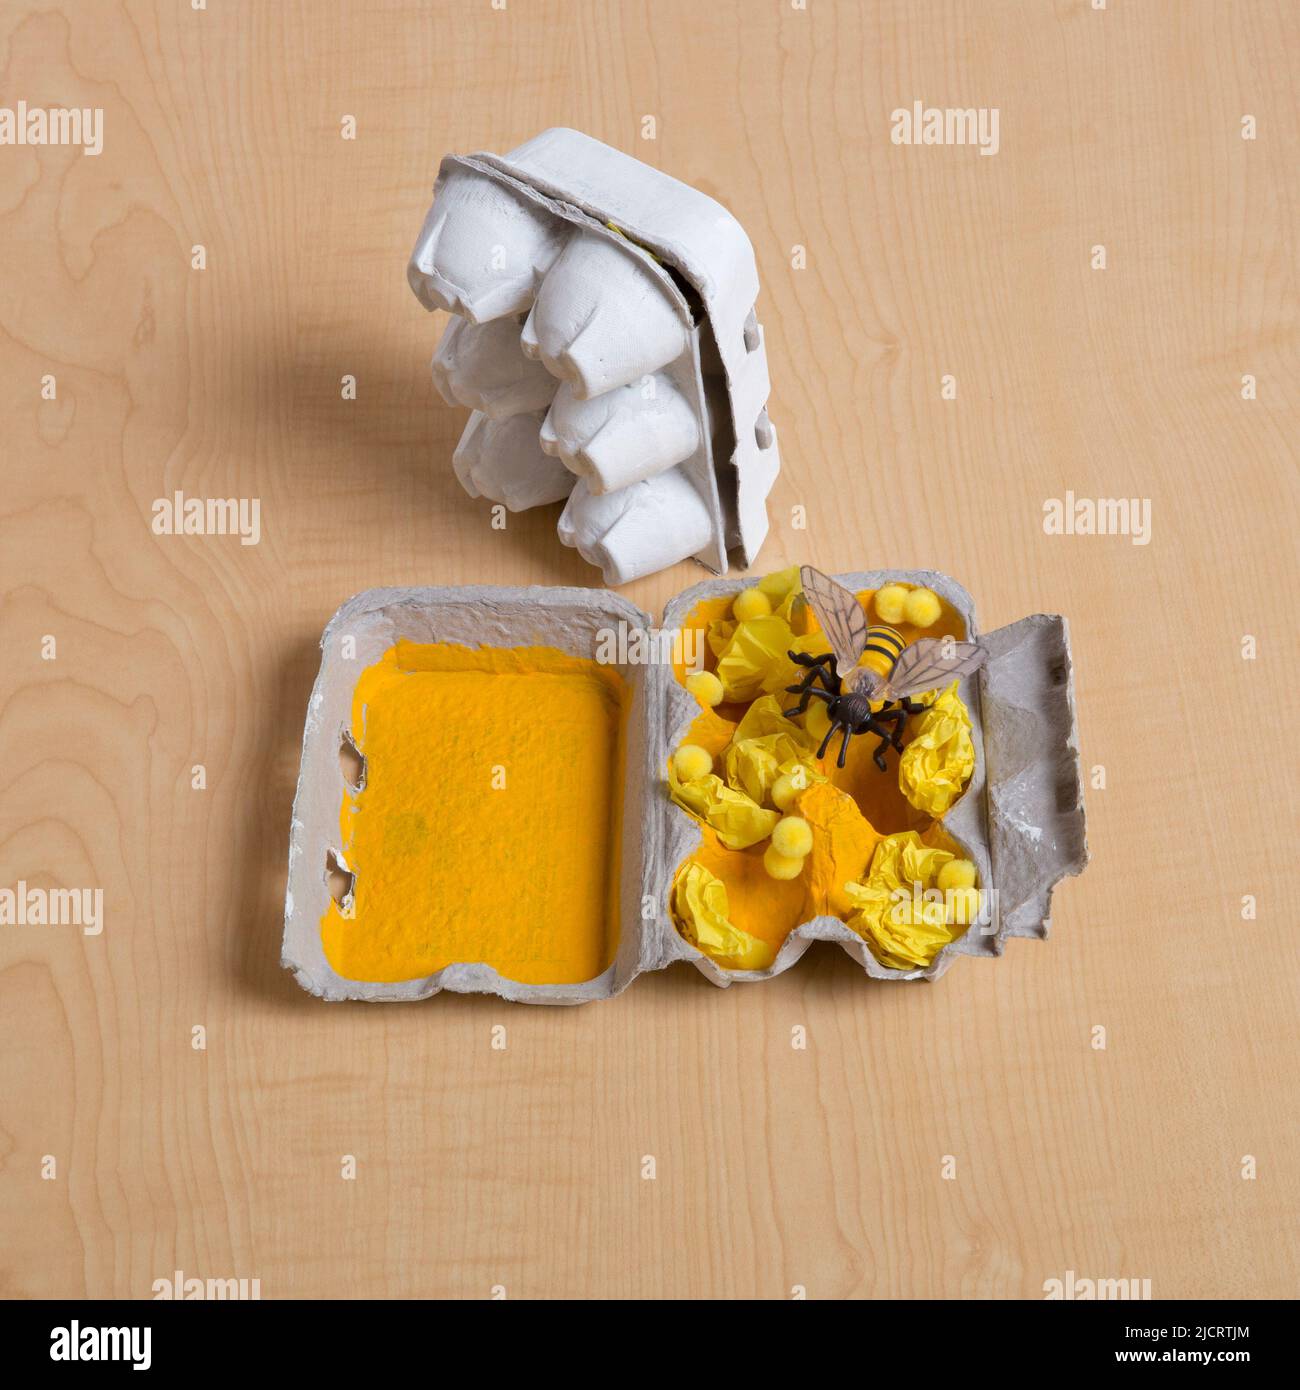 A children’s craft project using an egg carton to depict the interior of a honeybee honeycomb with larvae and pollen. Stock Photo